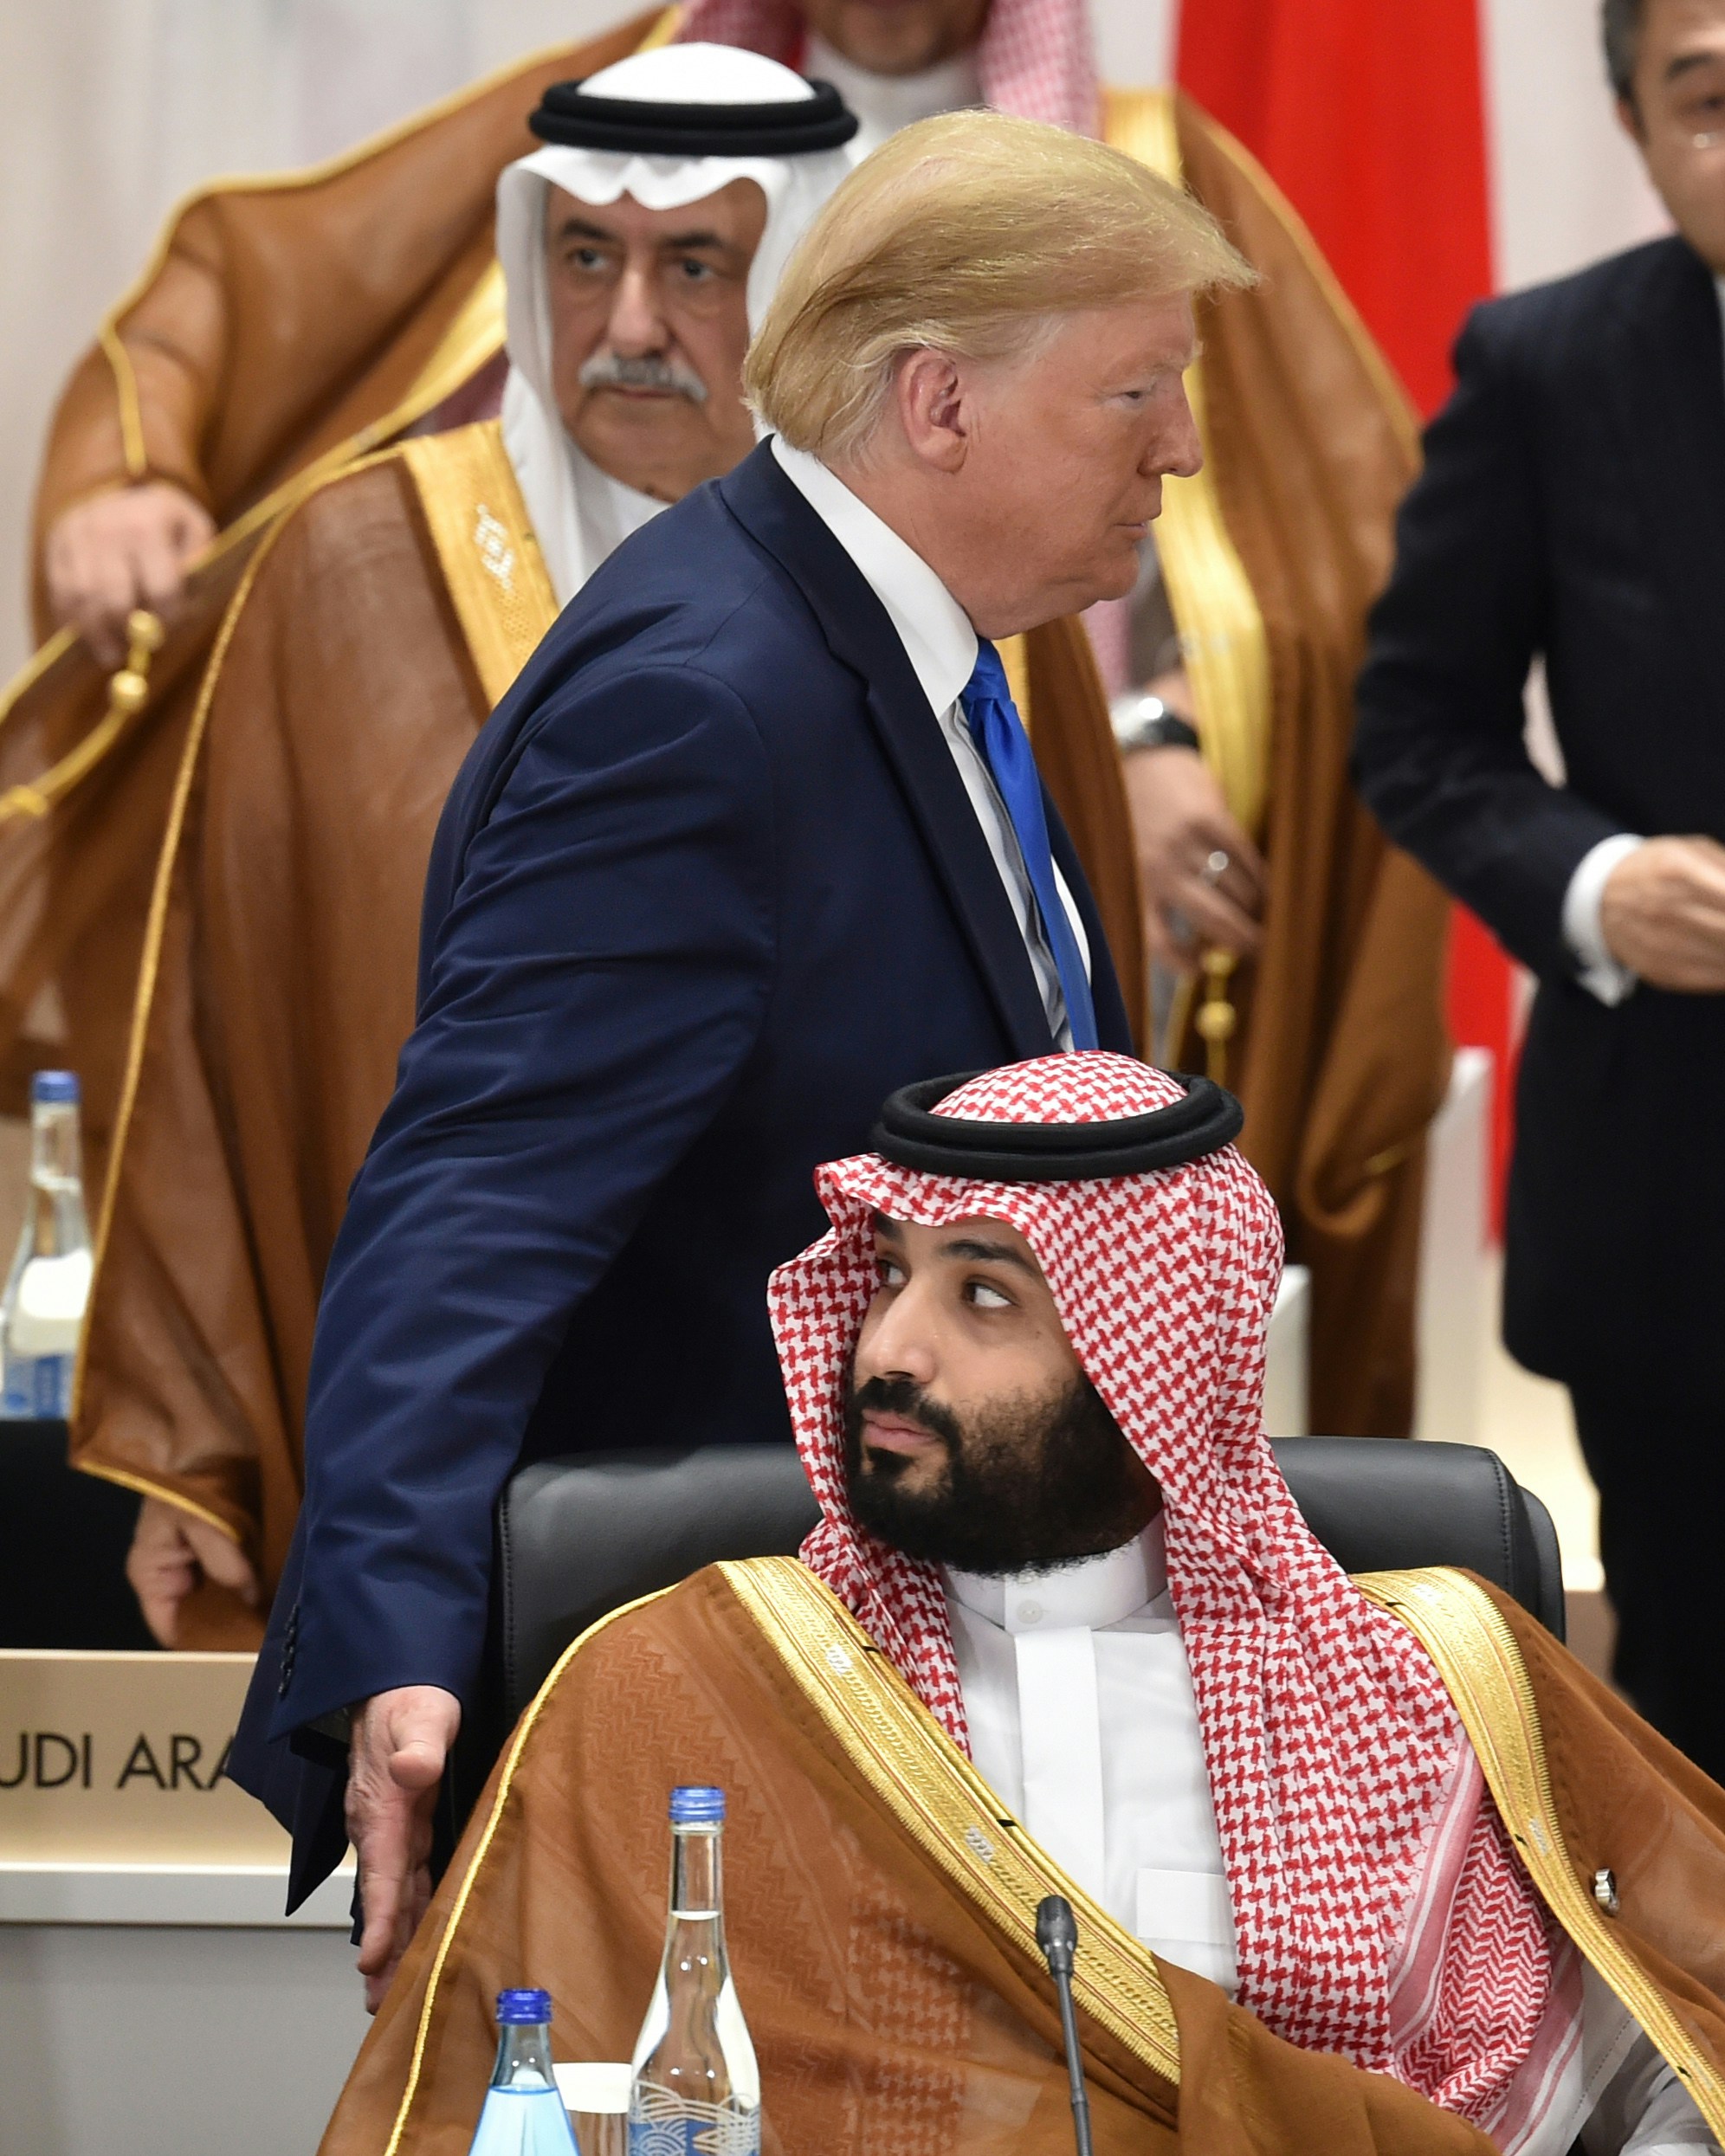 U.S. President Donald Trump, top, walks past Mohammed Bin Salman, Saudi Arabia's crown prince, bottom, as he arrives for a session at the Group of 20 (G-20) summit in Osaka, Japan, on Saturday, June 29, 2019. Disputes over wording on climate change and trade are unresolved shortly before Group of 20 leaders are due to release a communique from their summit in Japan, raising the risk of a very watered-down document or no statement at all. Photographer: Kazuhiro Nogi/Pool via Bloomberg